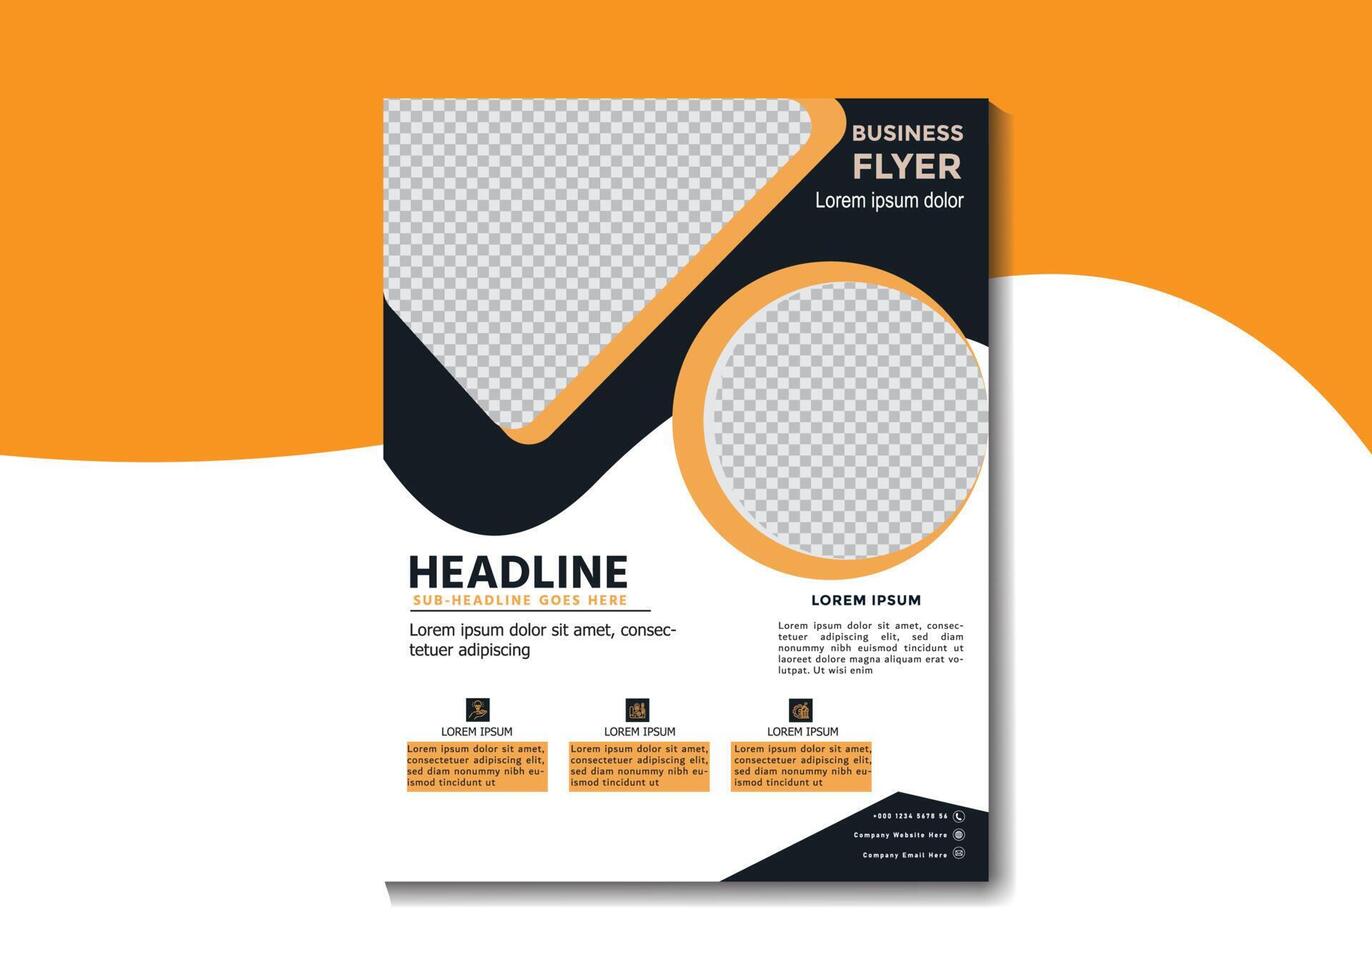 Vector corporate business multipurpose flyer design and brochure cover page template